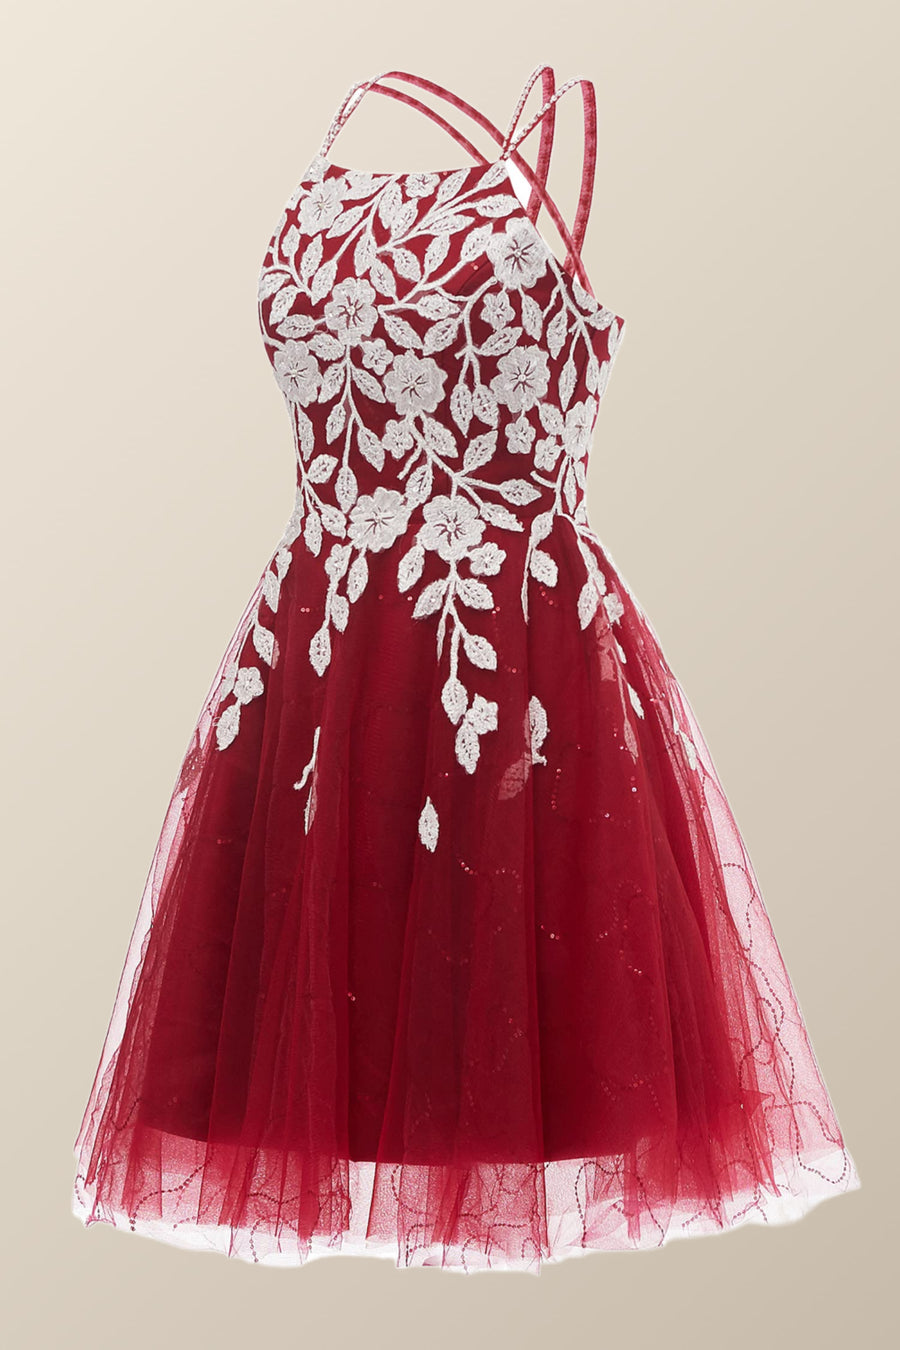 Wine Red Tulle and White Appliques A-line Dress